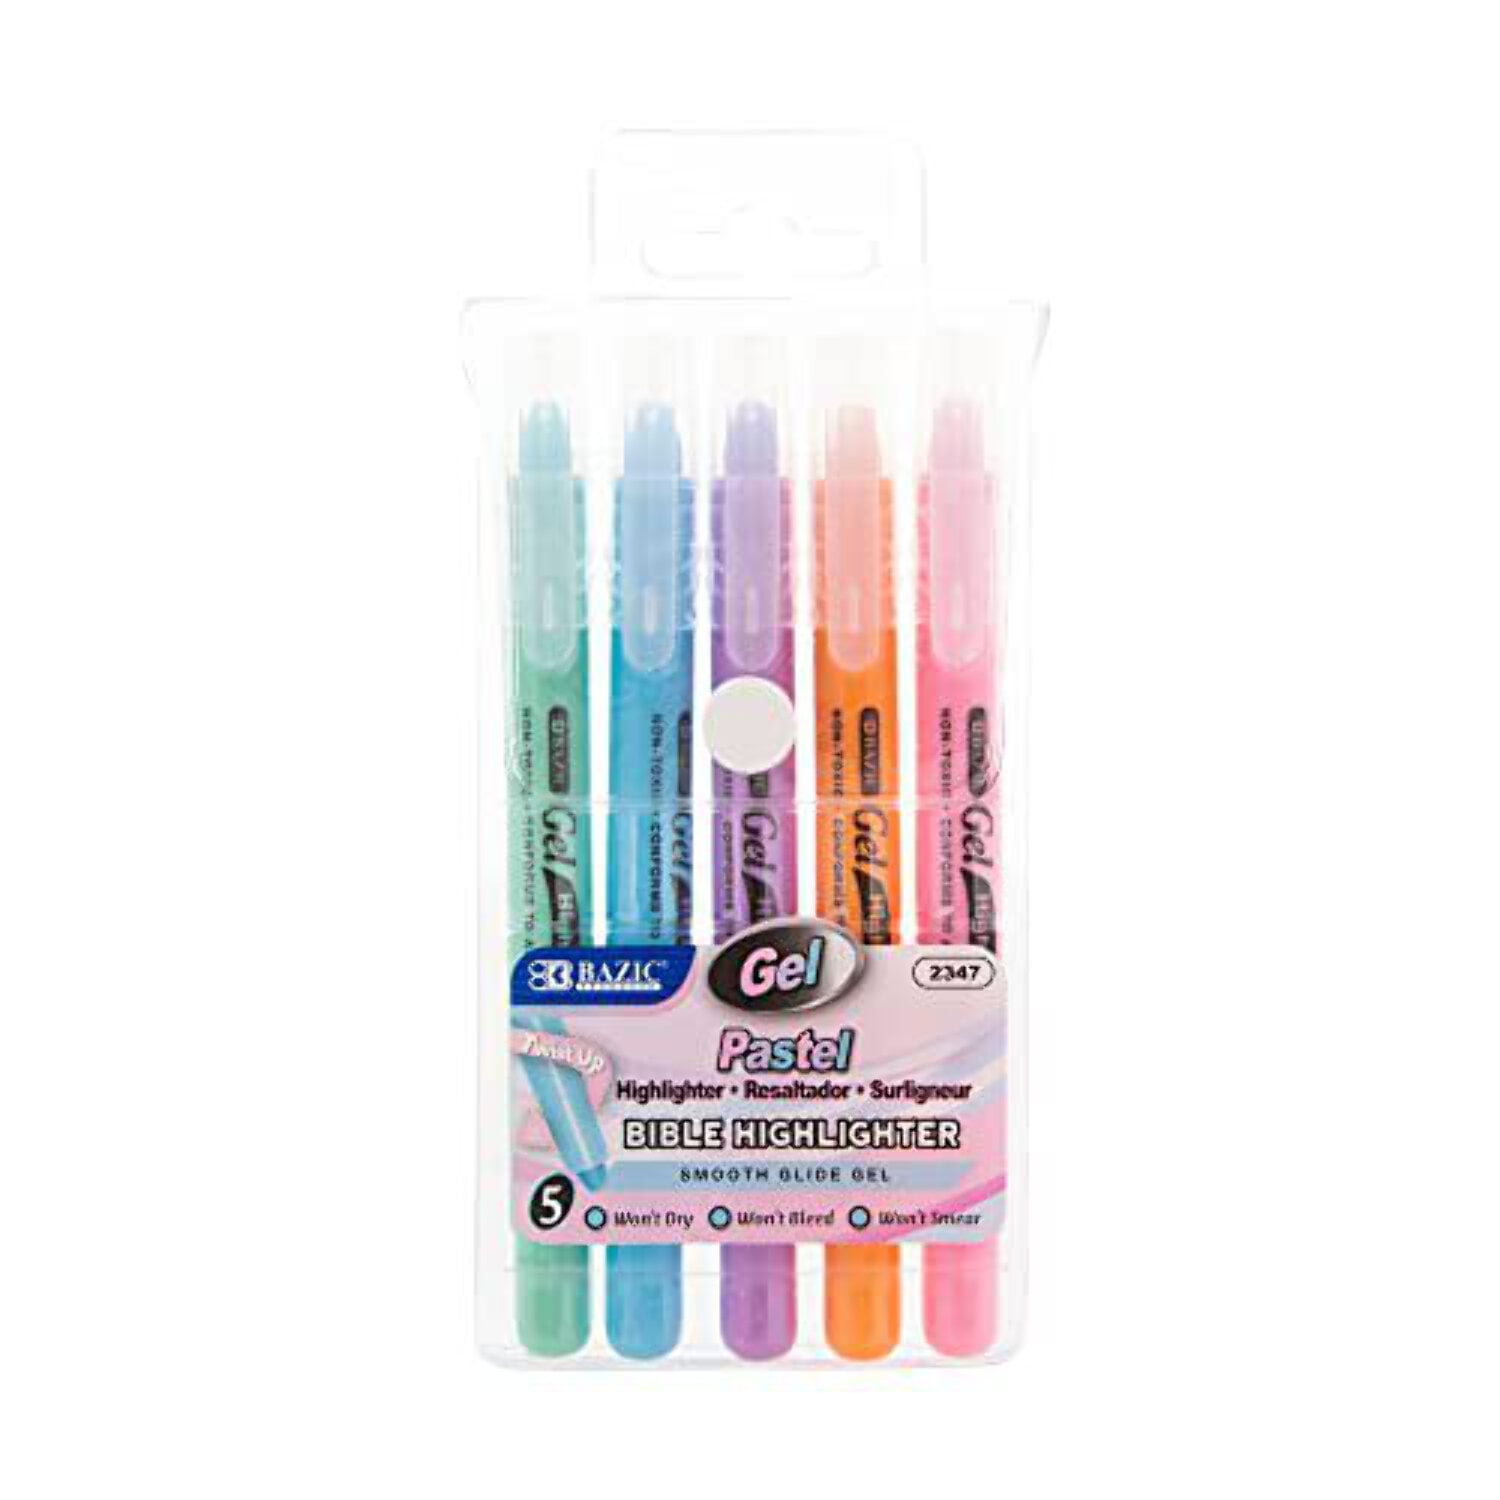 BLIEVE- Bible Highlighters And Pens No Bleed Through, Bible Verse